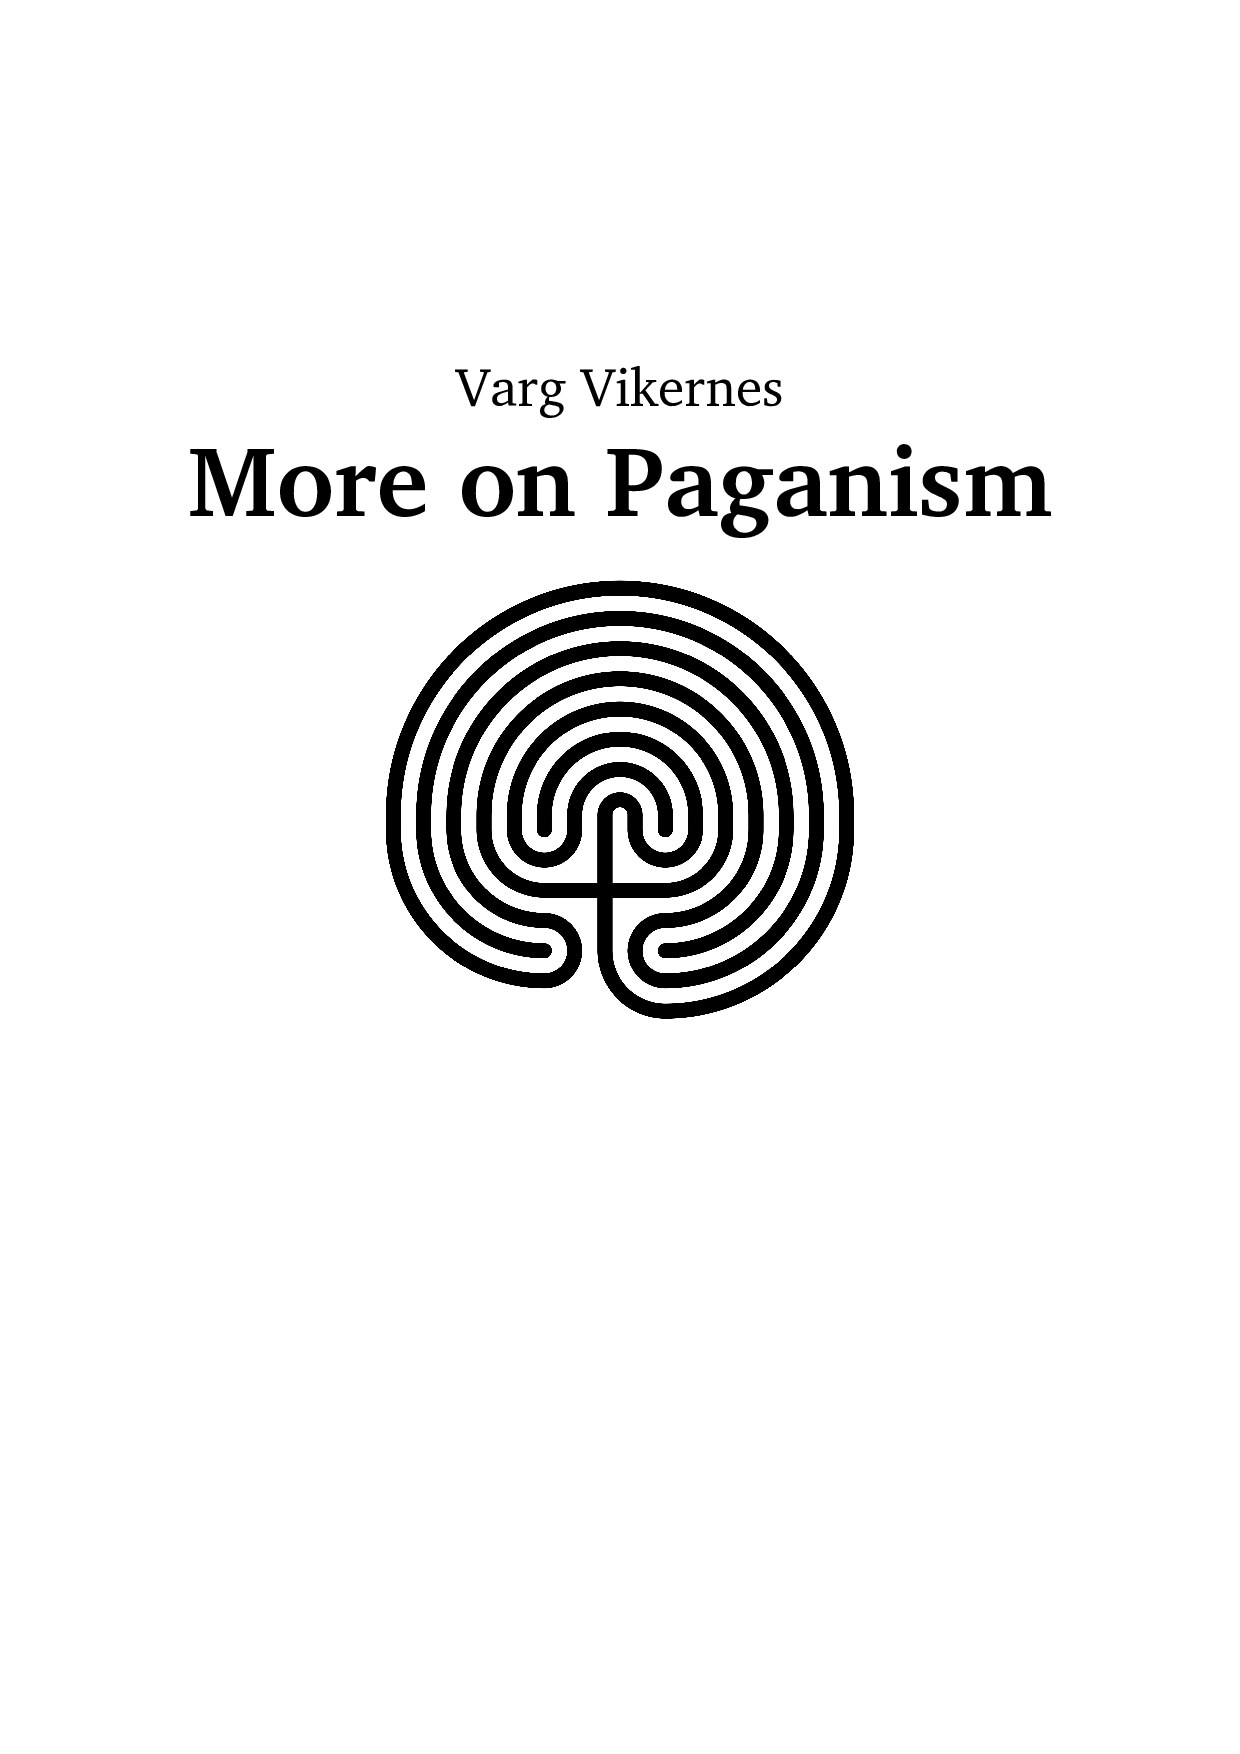 More on Paganism